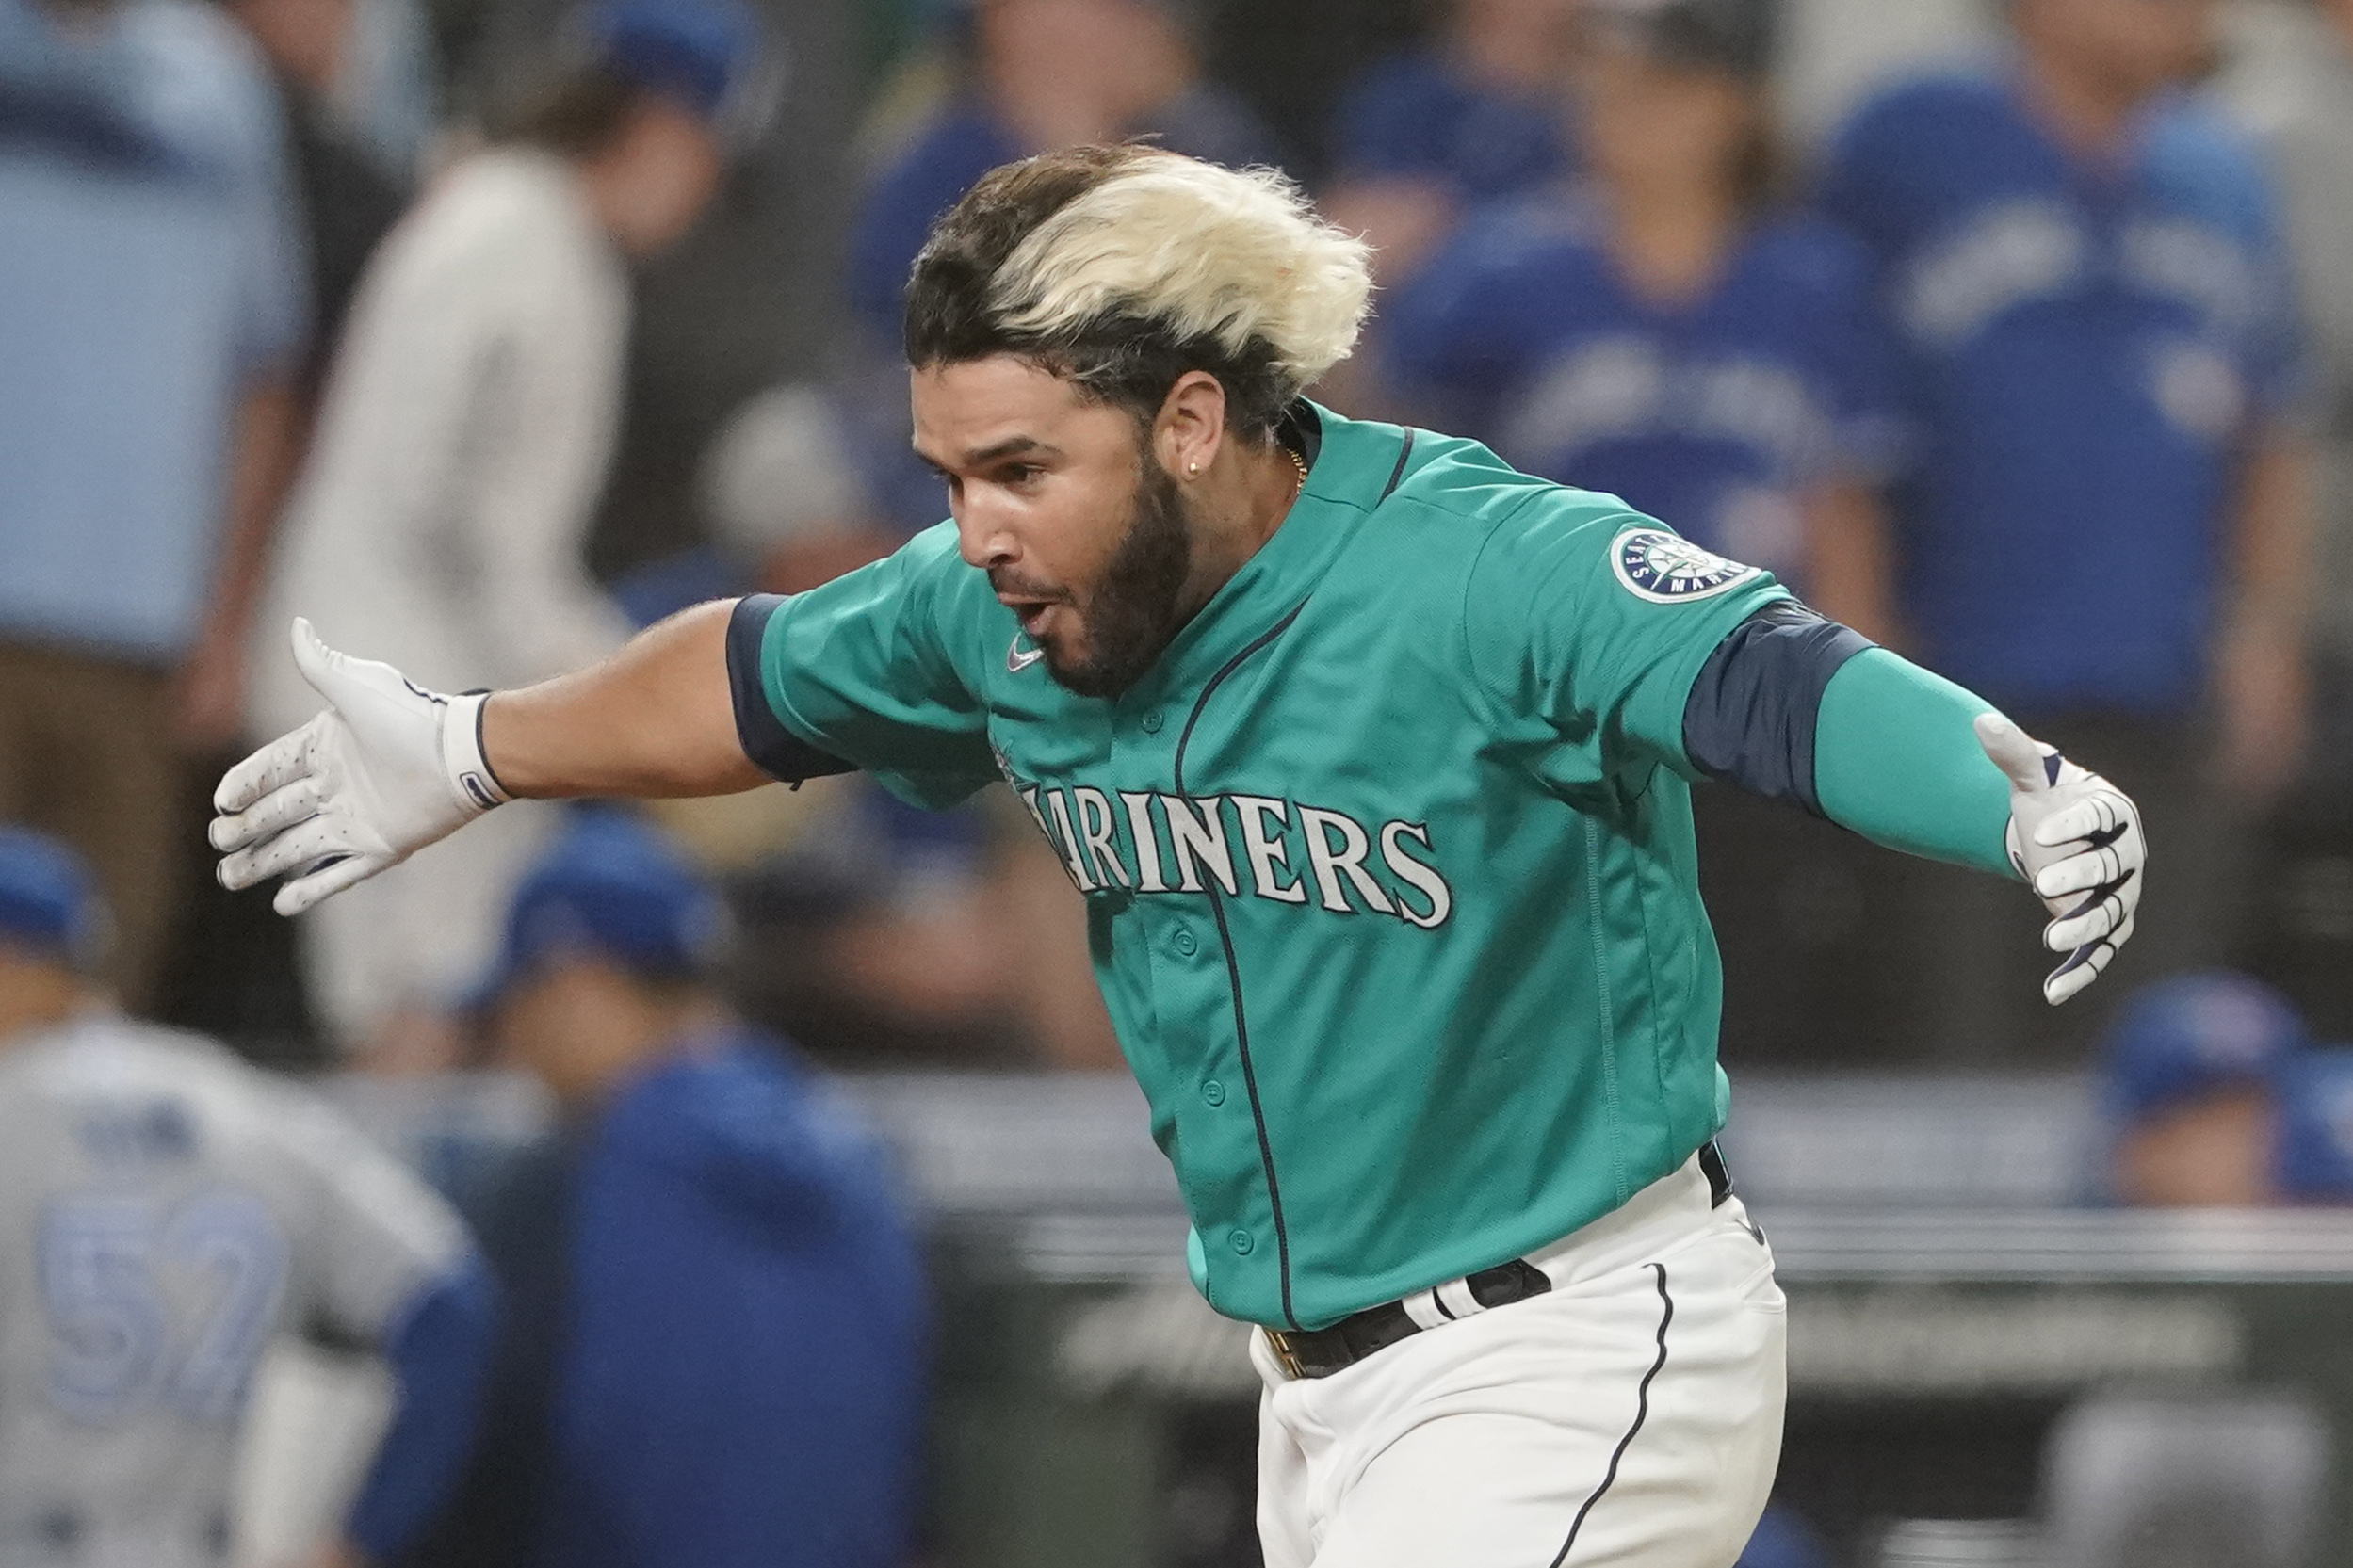 Seattle Mariners' Eugenio Suarez reacts after he hit a walk-off three-run home run against the Toronto Blue Jays during the 11th inning of a baseball game, Friday, July 8, 2022, in Seattle. The Mariners won 5-2 in 11 innings. (AP Photo/Ted S.